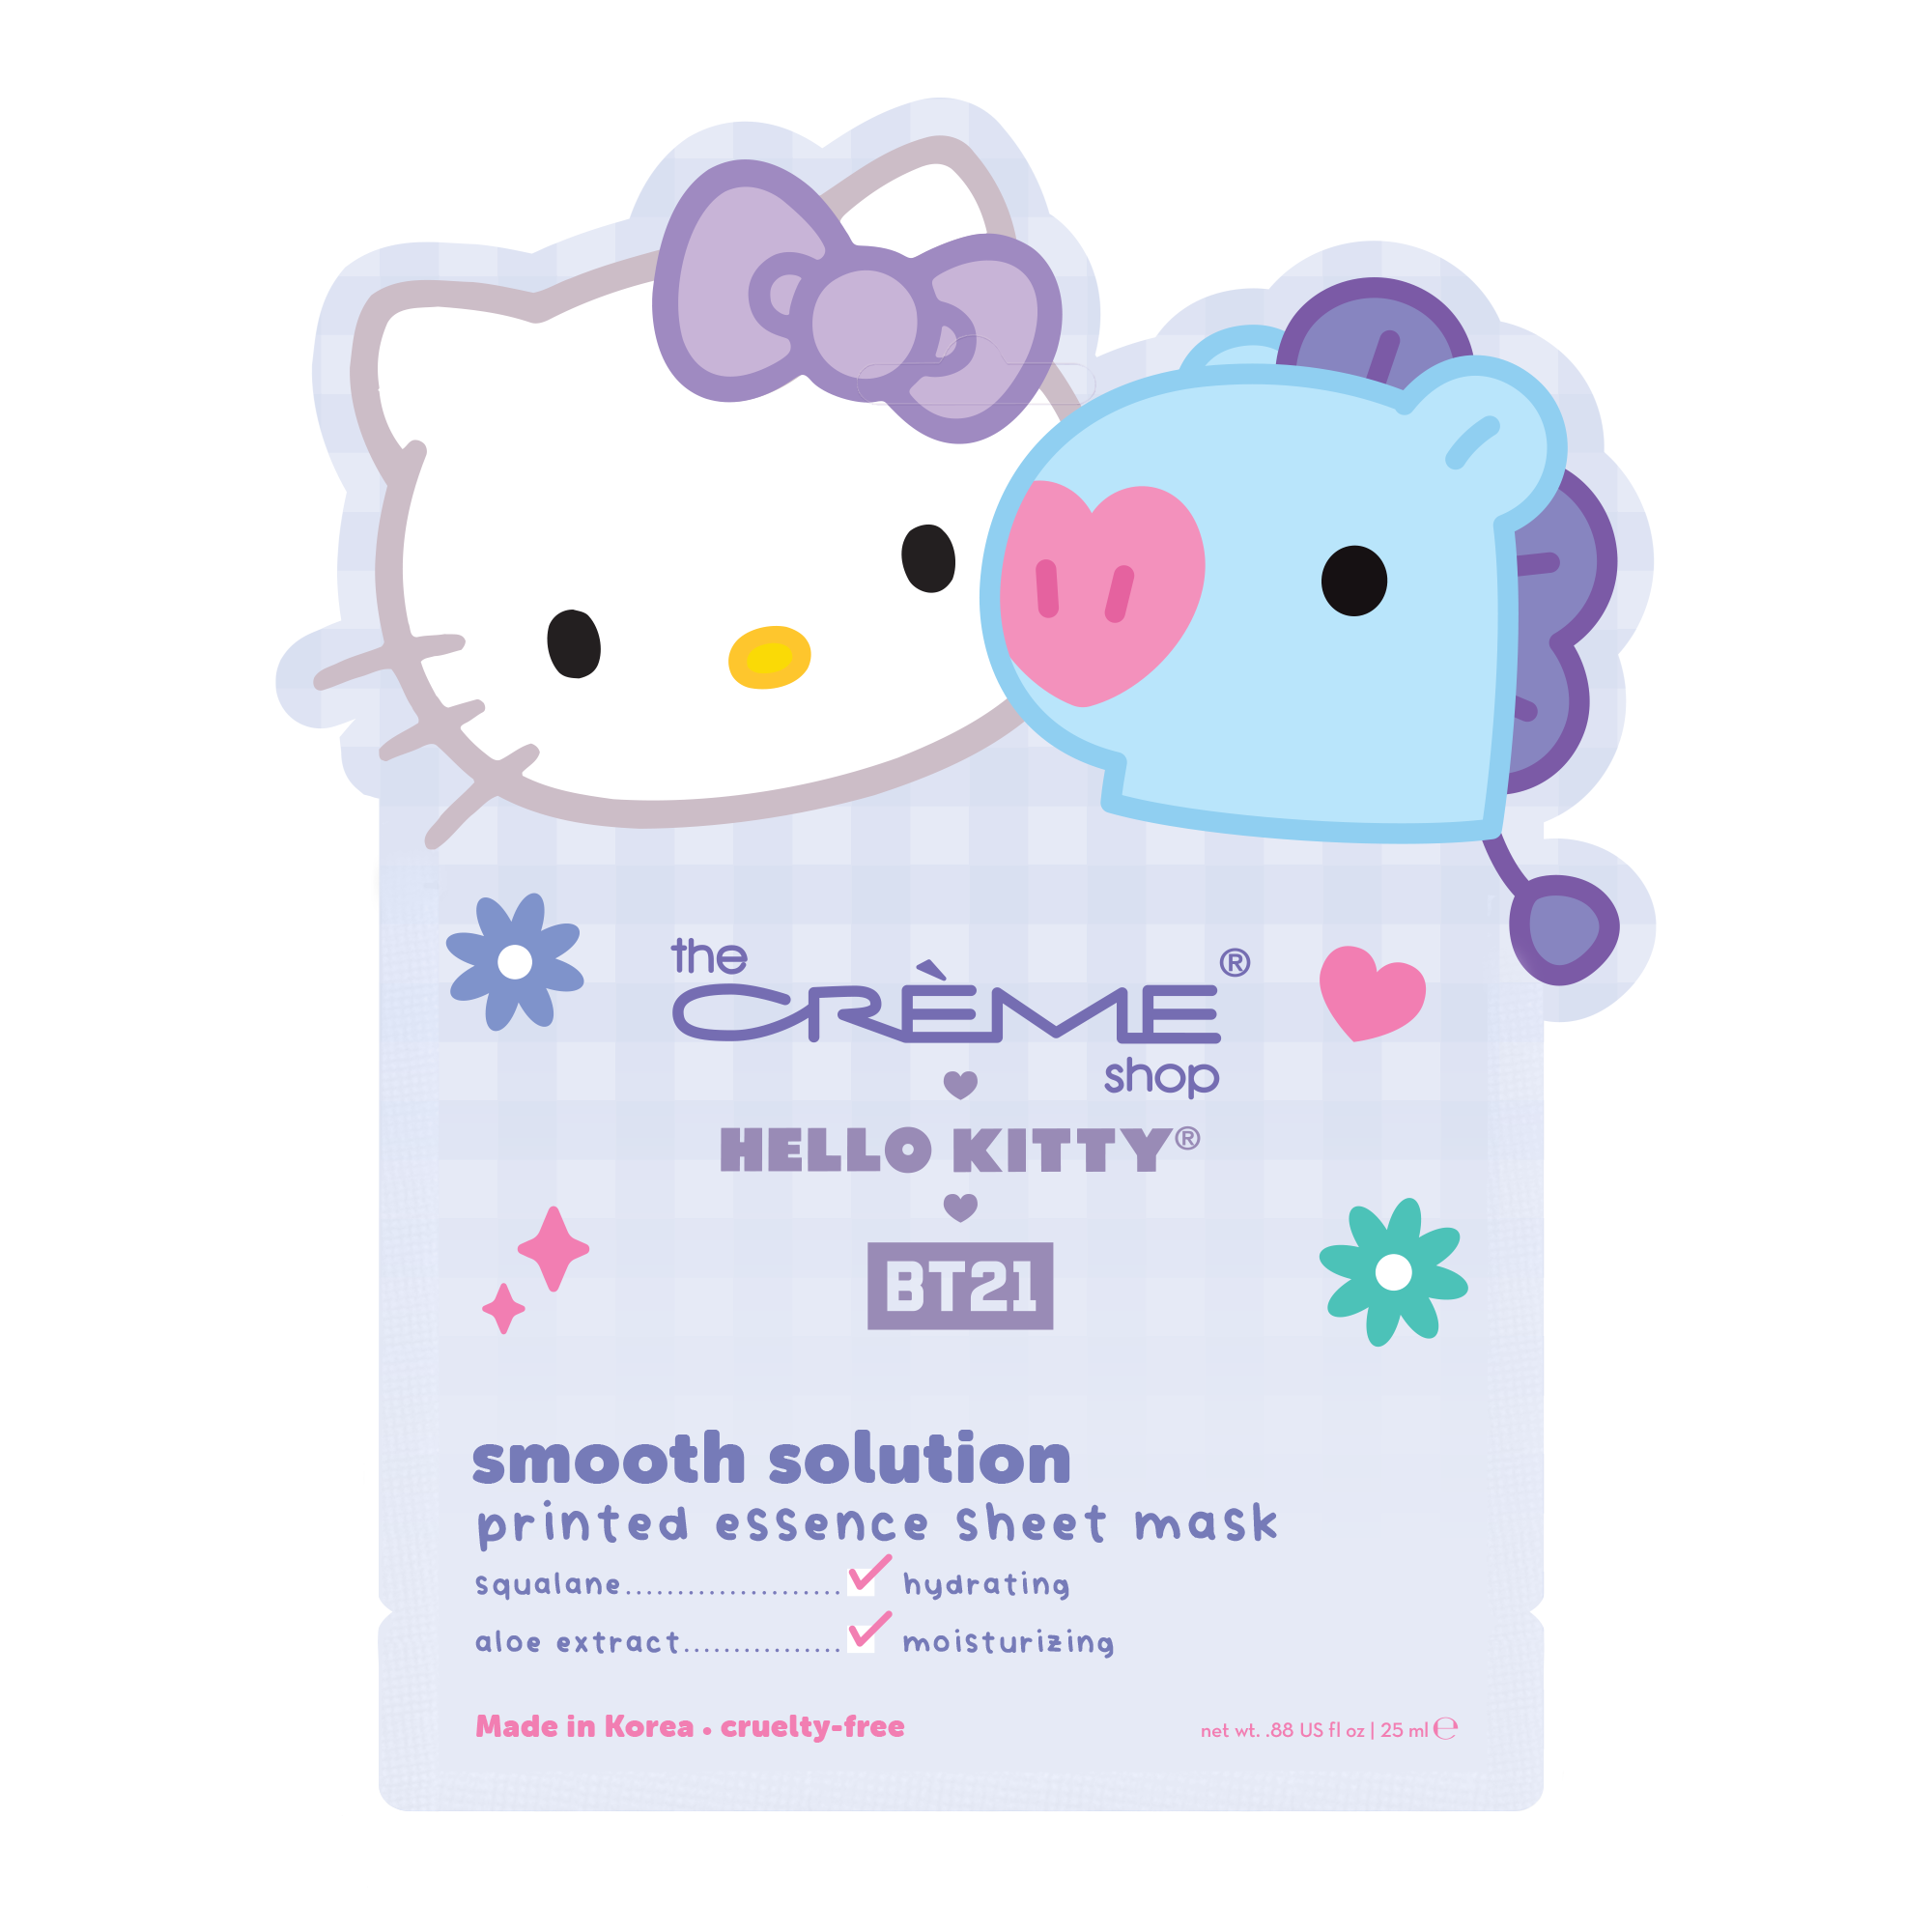 Hello Kitty & BT21 Smooth Solution Printed Essence Sheet Mask Beauty The Crème Shop   